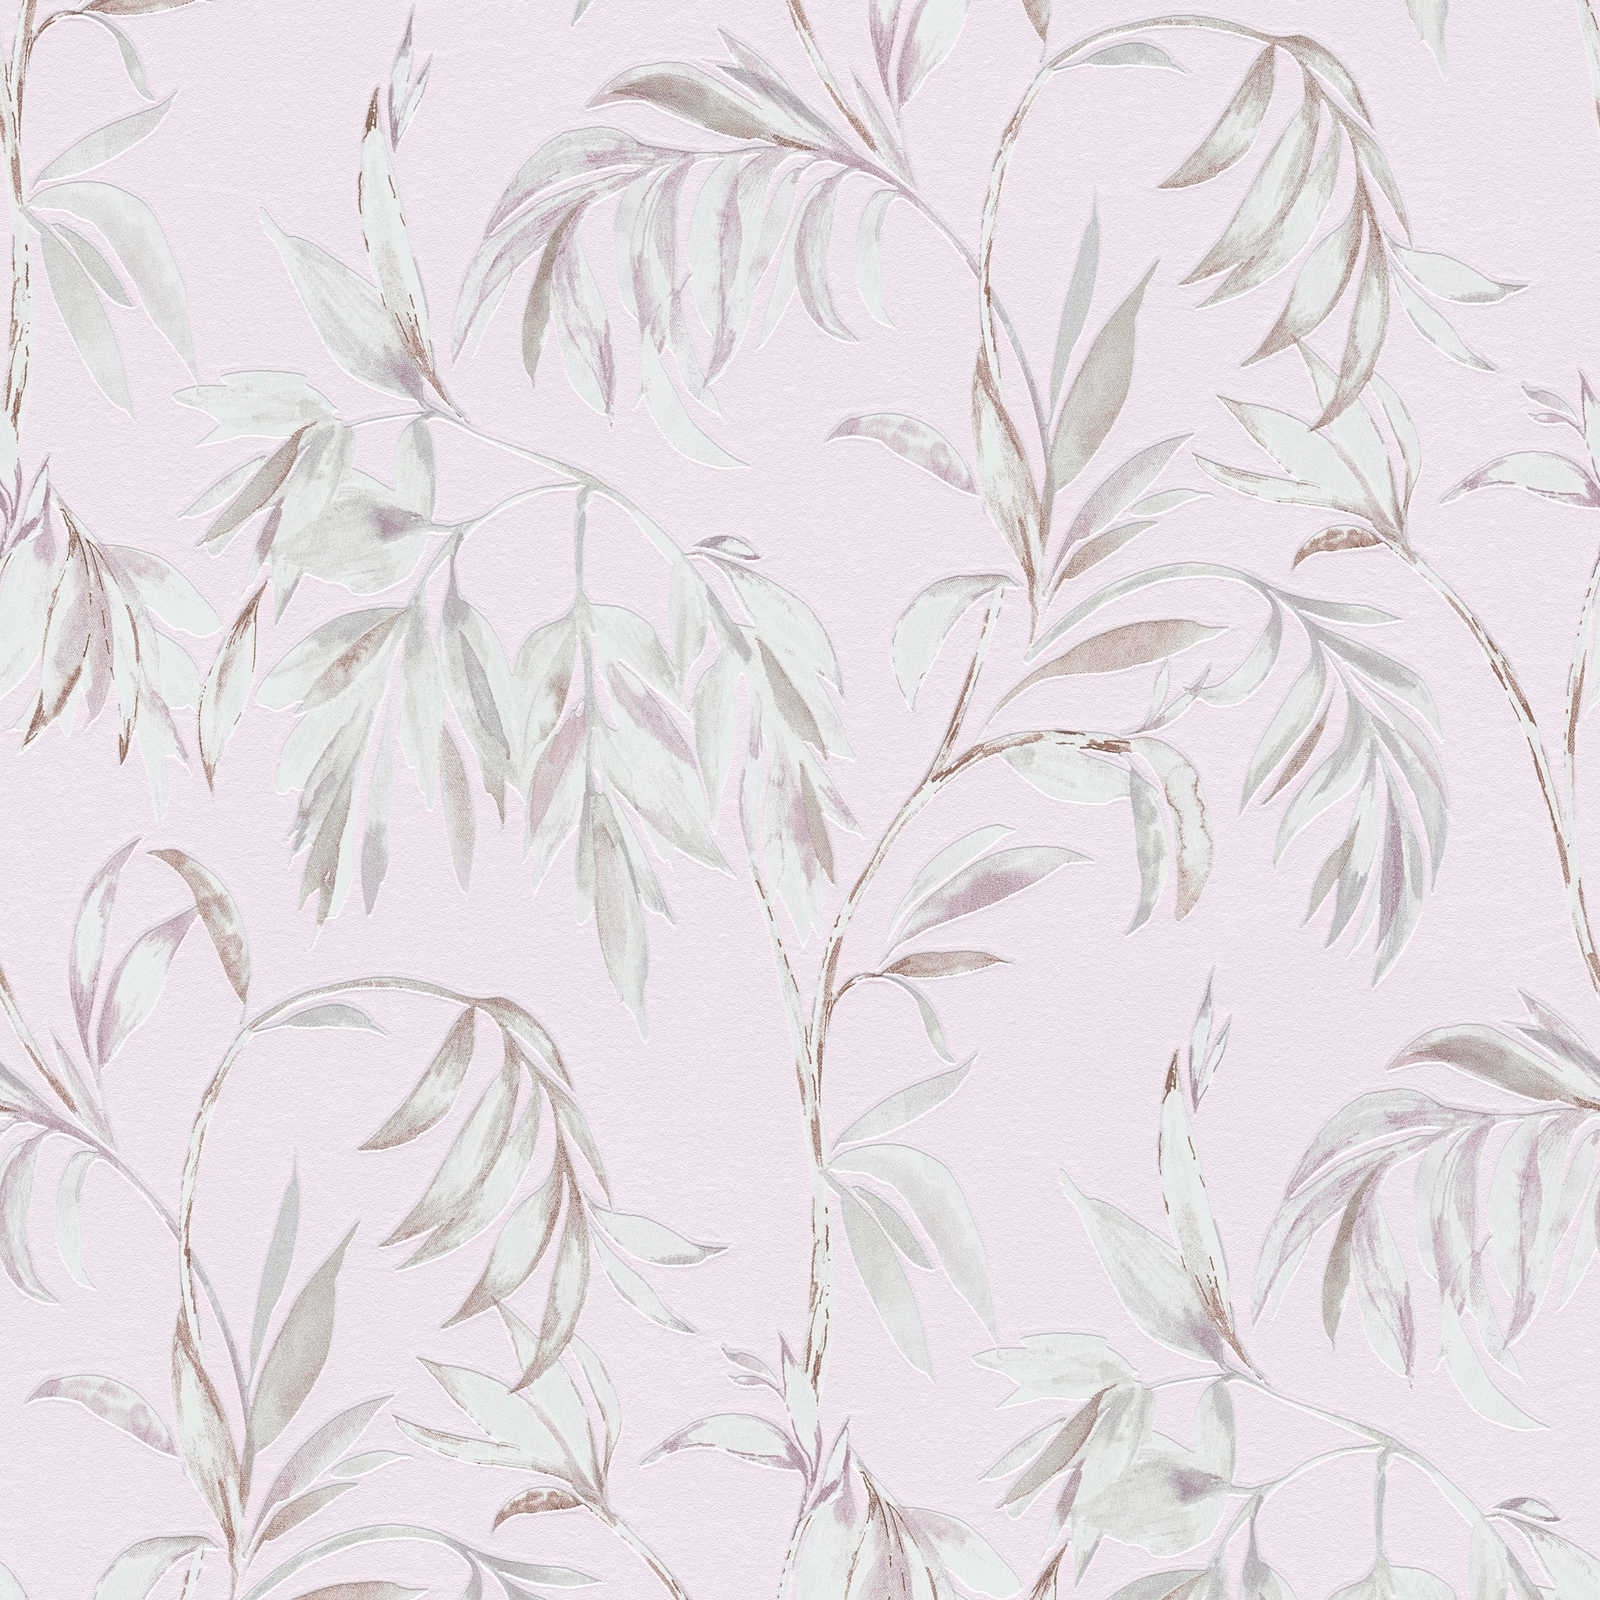 Leaves wallpaper pink design in watercolour style - purple
